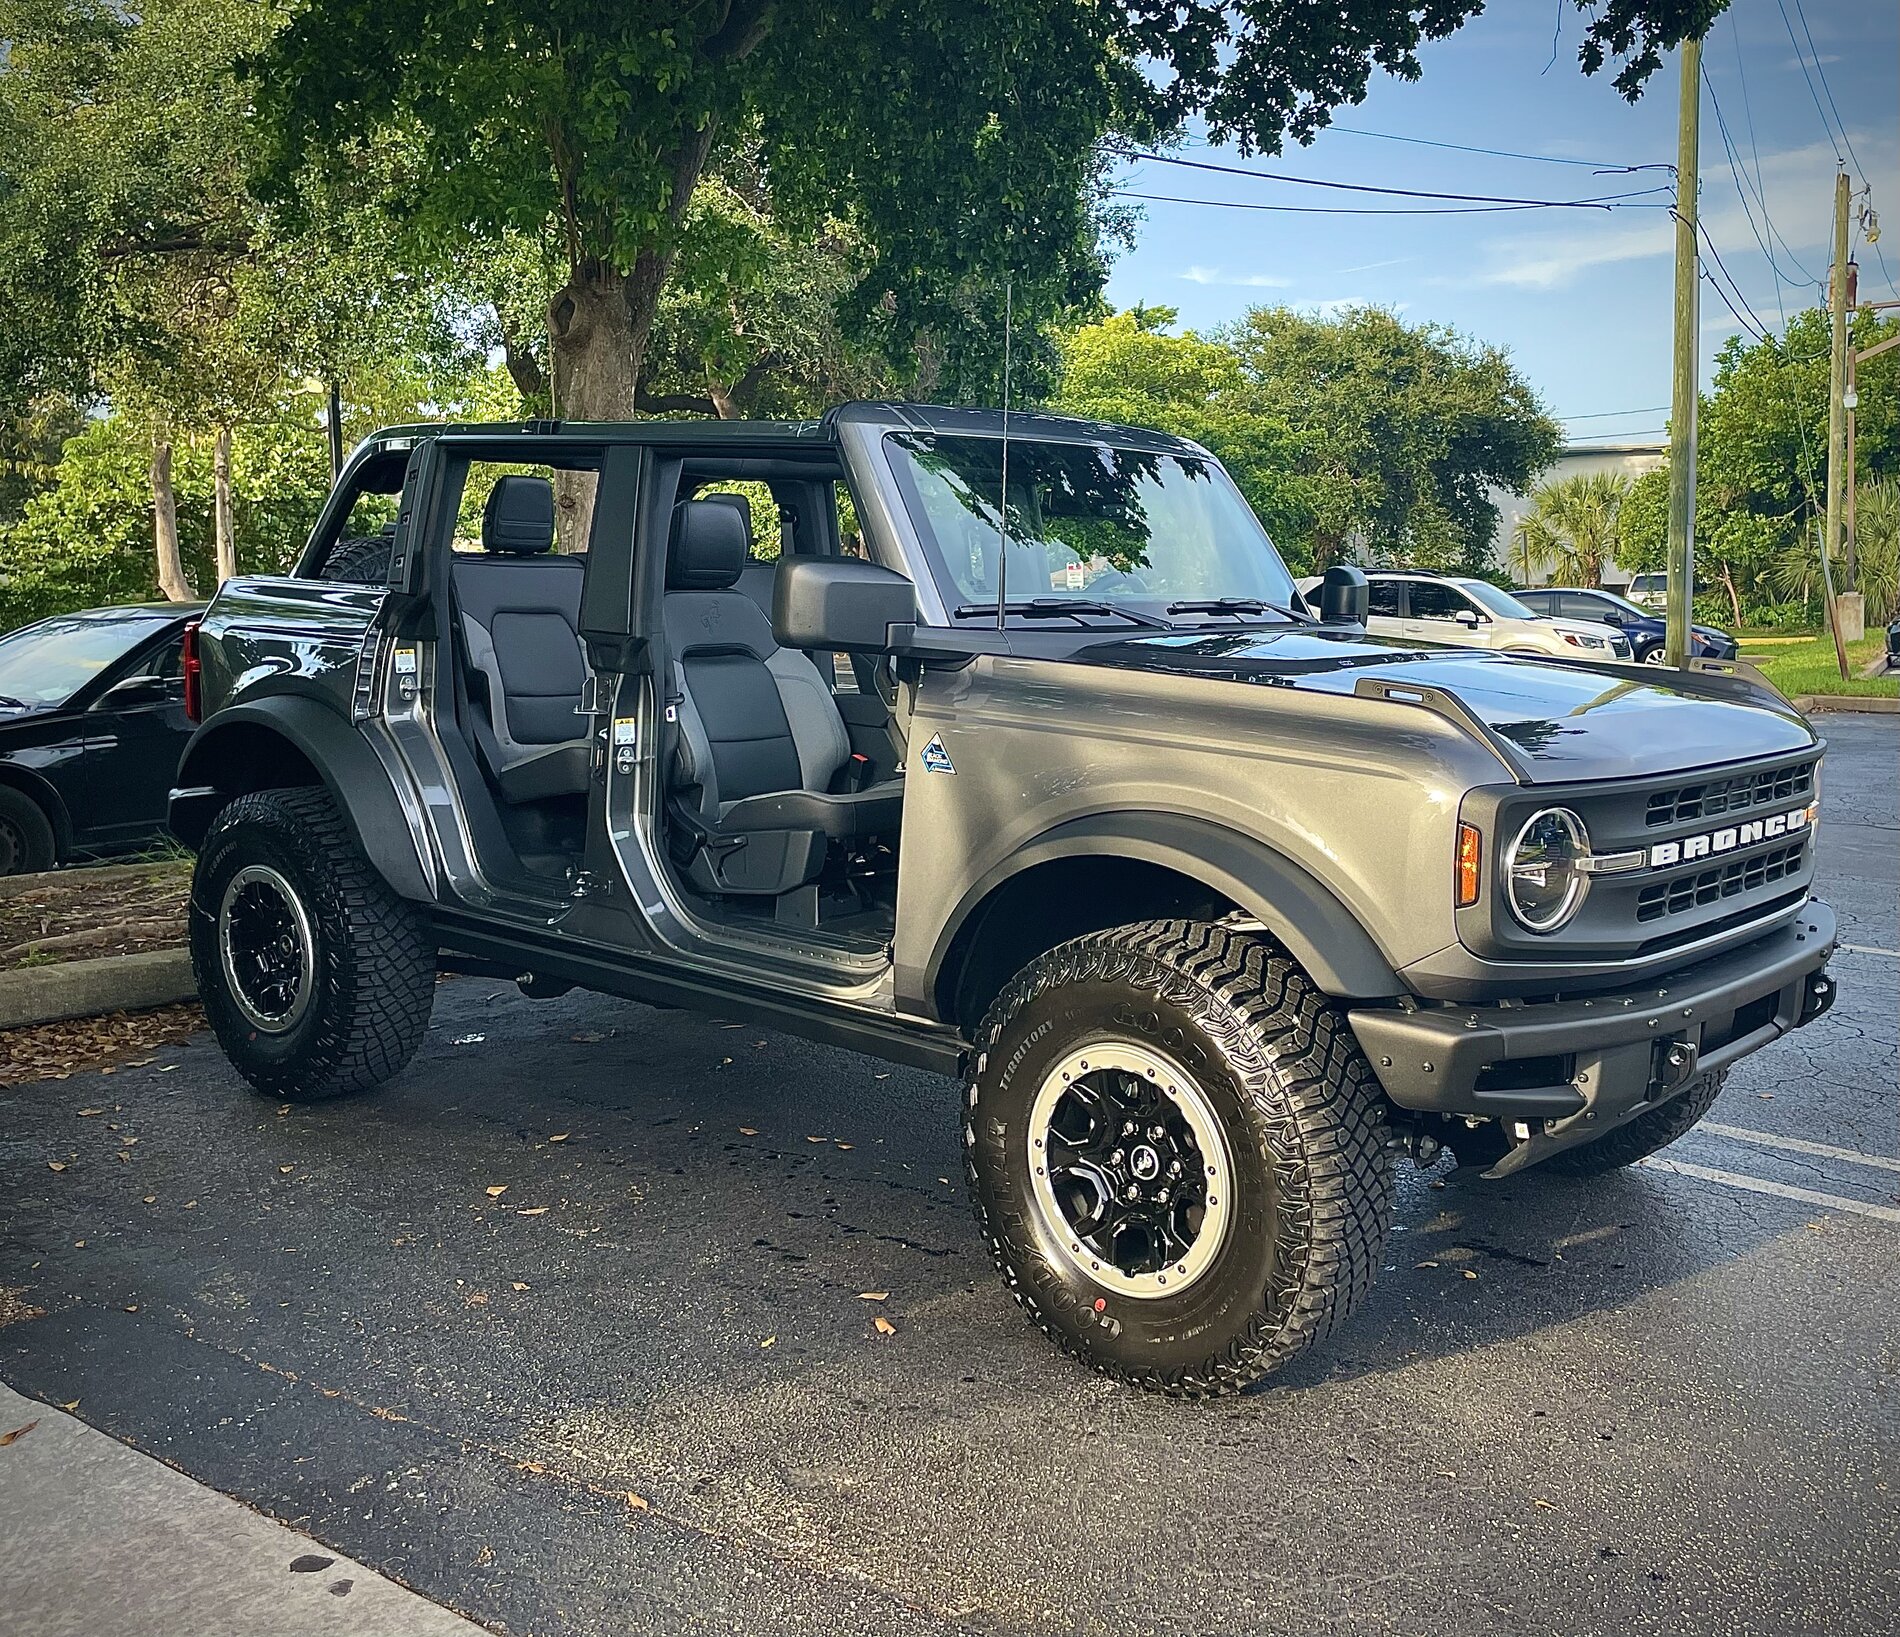 Ford Bronco Black Diamond Sasquatch delivered in S. Florida - Order/Delivery Timeline & First Impressions 1CCB4870-5D73-4E6A-8D25-5348EA9FF247